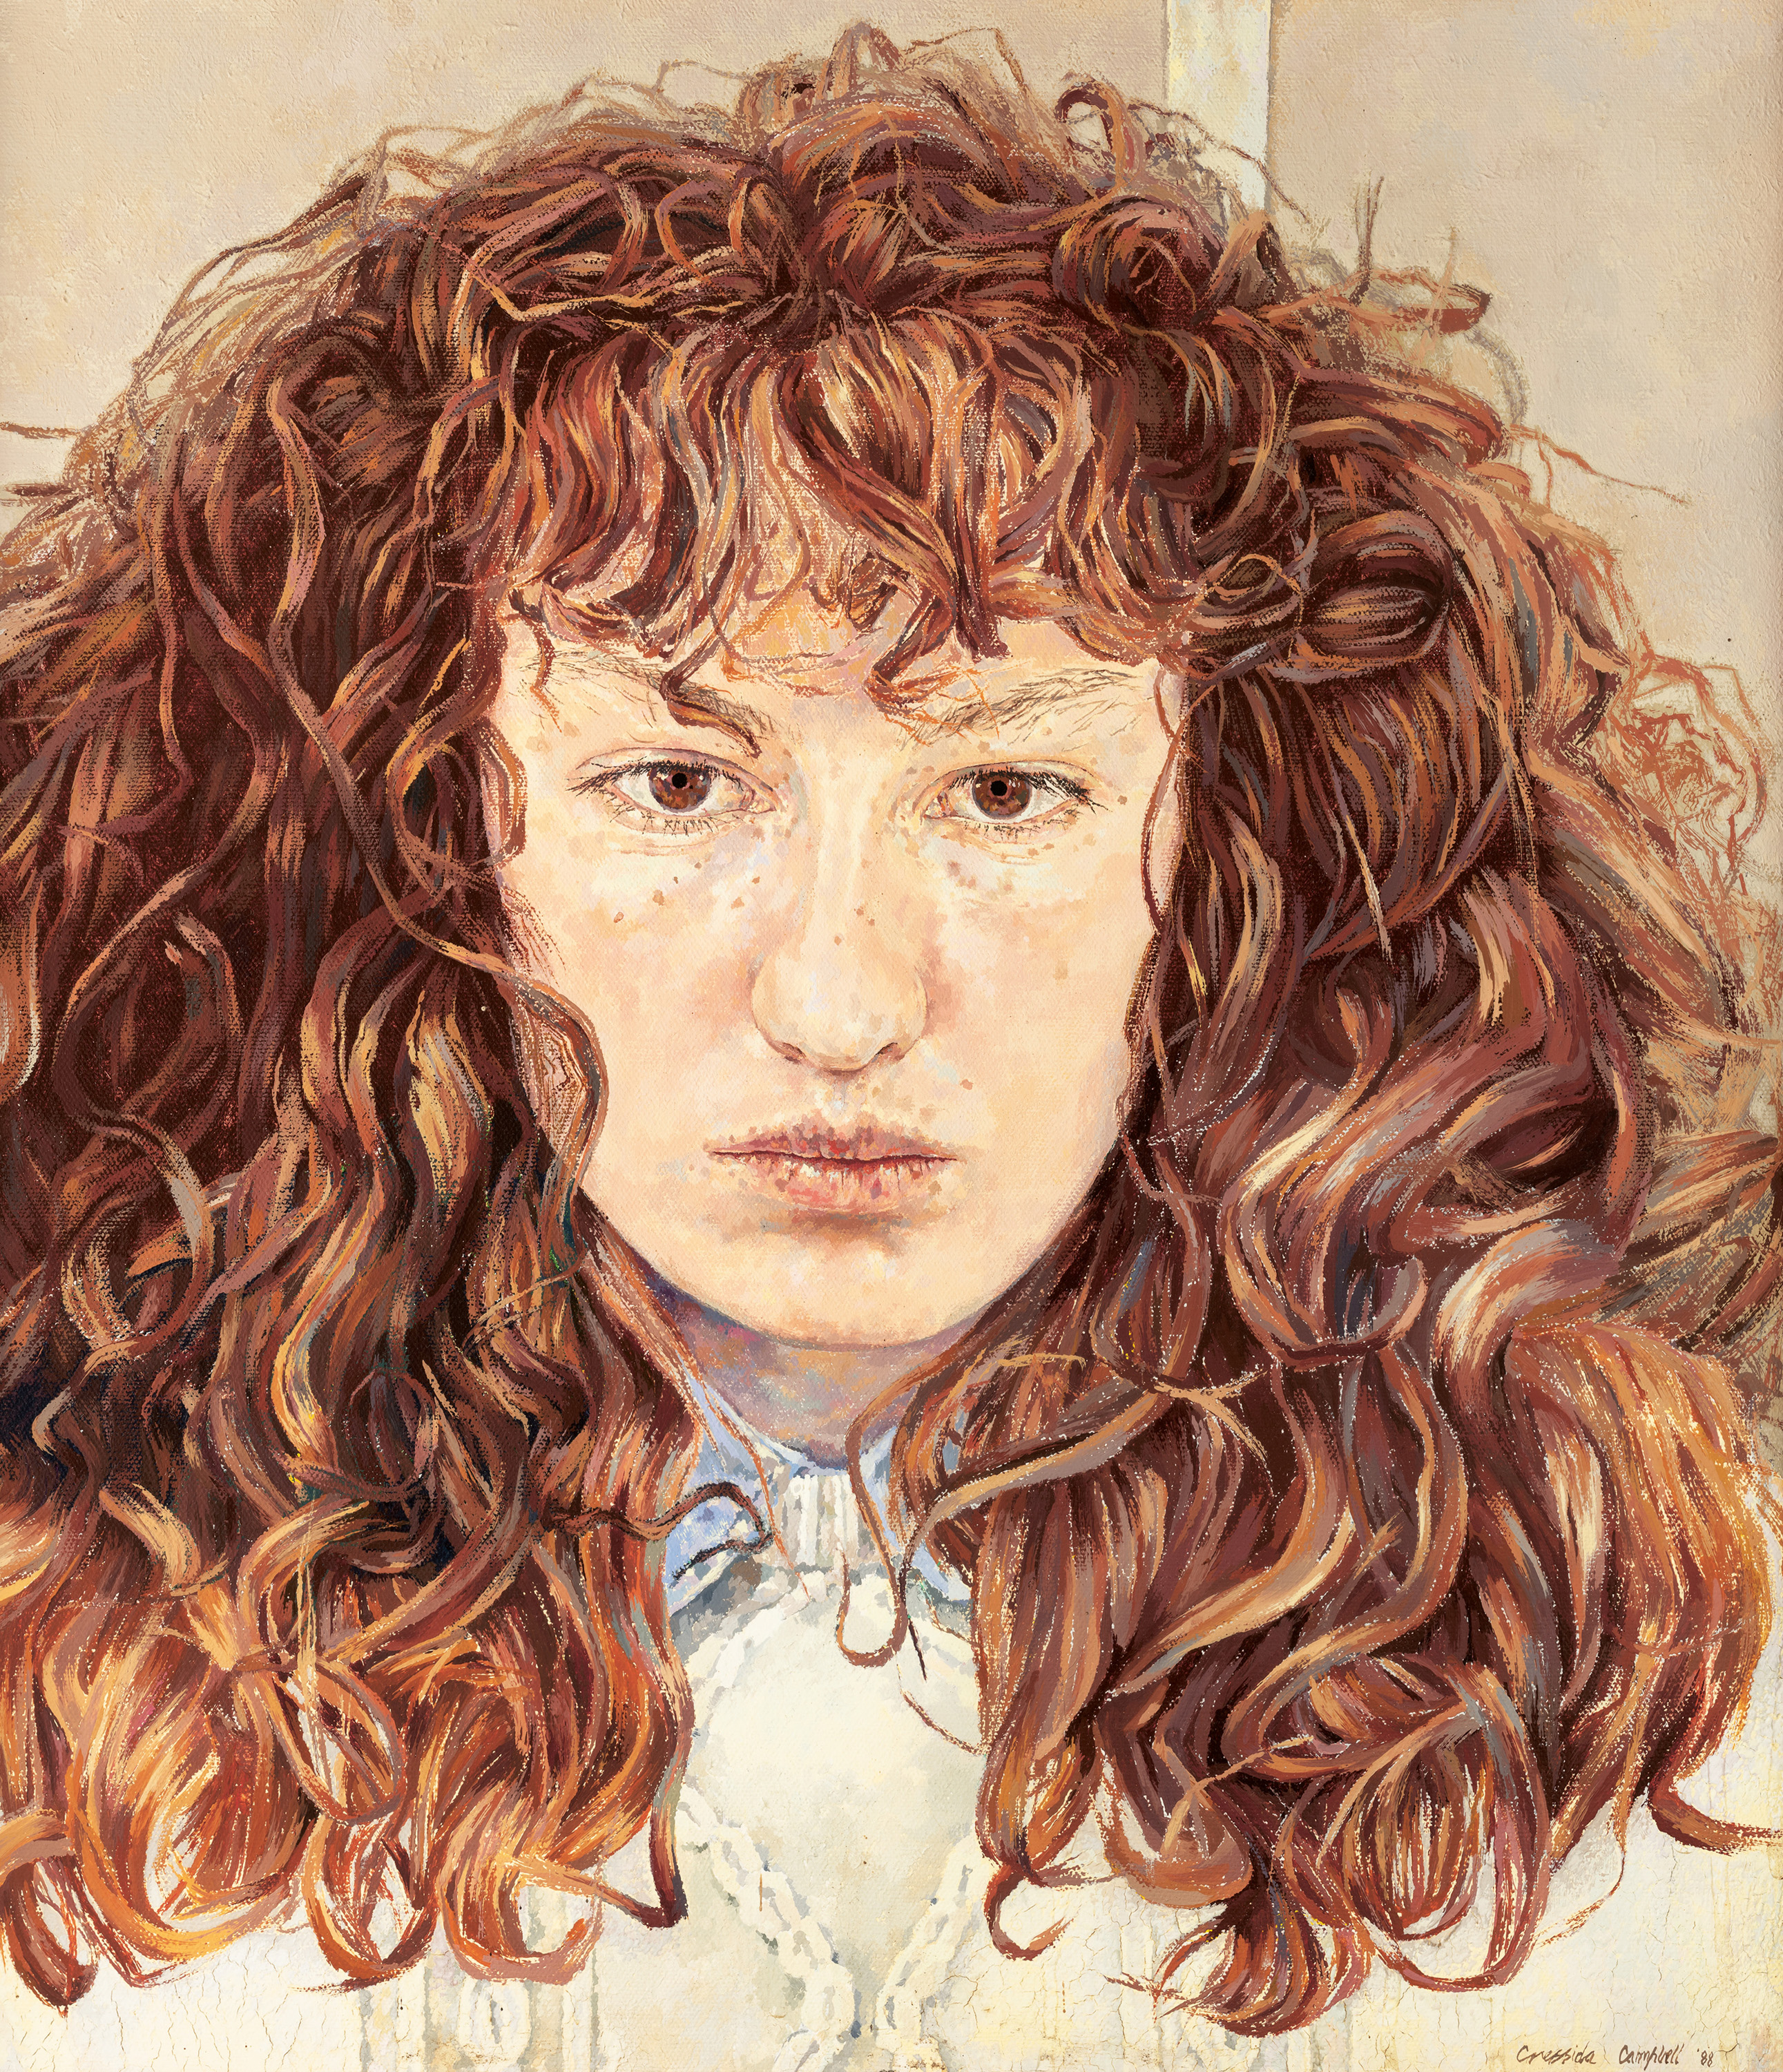 A painting of a woman in her twenties with a stern expression on her face.  She has bushy brown hair and bangs and brown eyes.